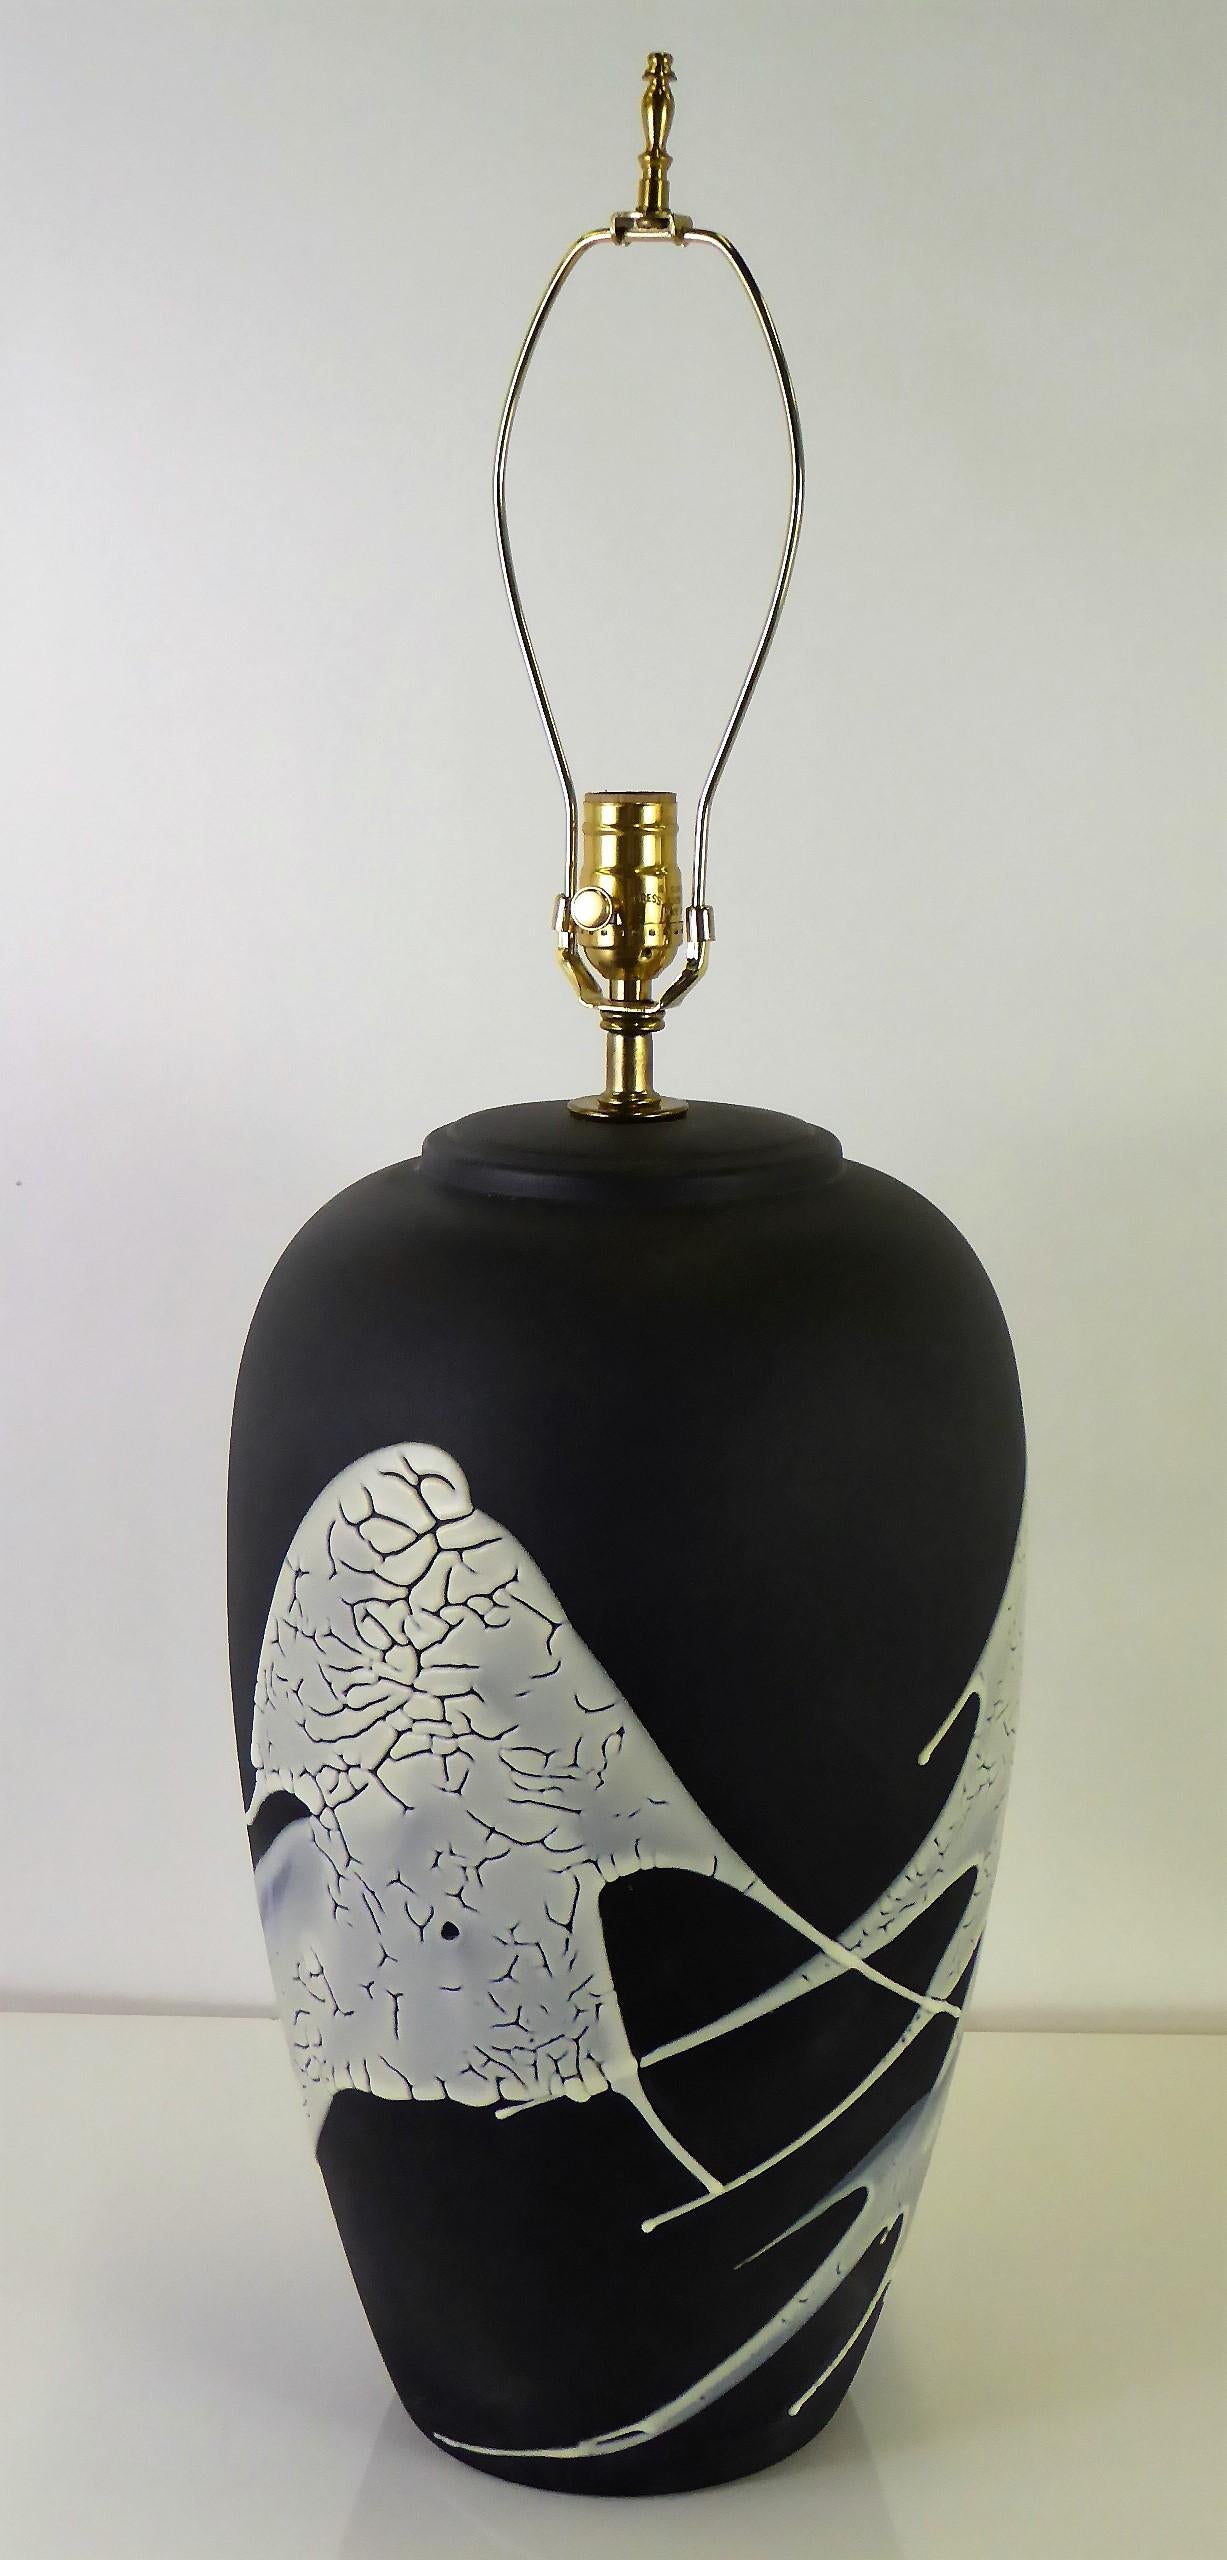 1960s lava glaze ceramic table lamp with a matte black finish and splashes of white lava glaze. An oil jar shape, it has been rewired and with a new brass UL three level socket. Takes medium base bulbs.
Measurements: 10 in. diameter x 20 in. high